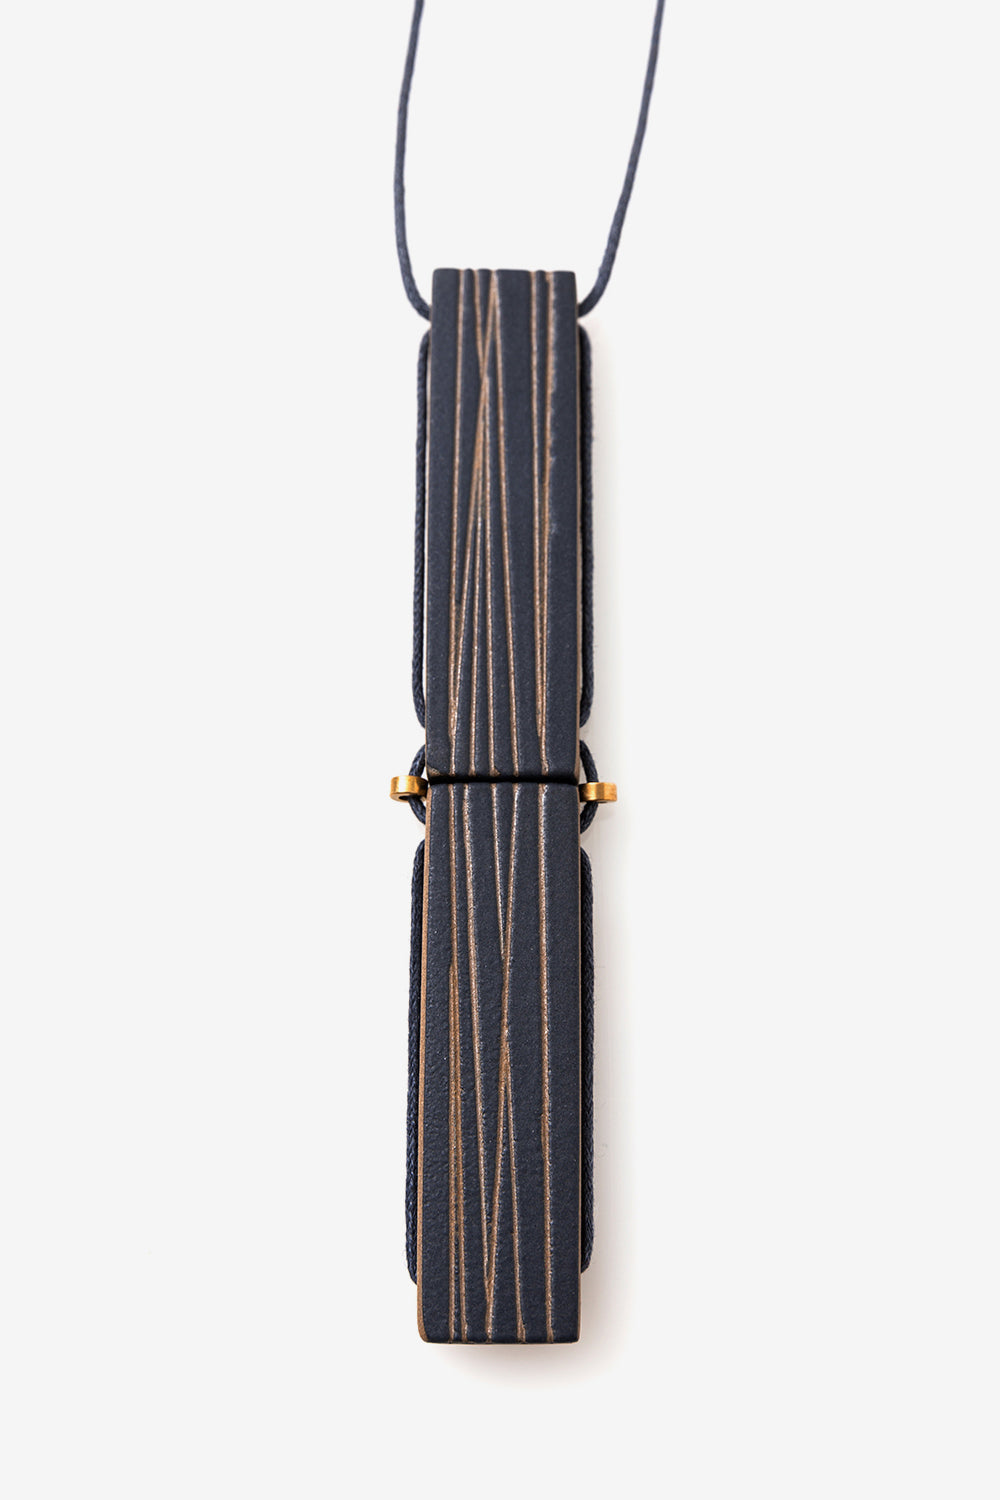 Alabama Chanin Vertical Bar Necklace by Heath Ceramics. Handmade Clay Necklace with Striped Pattern in Indigo Color.